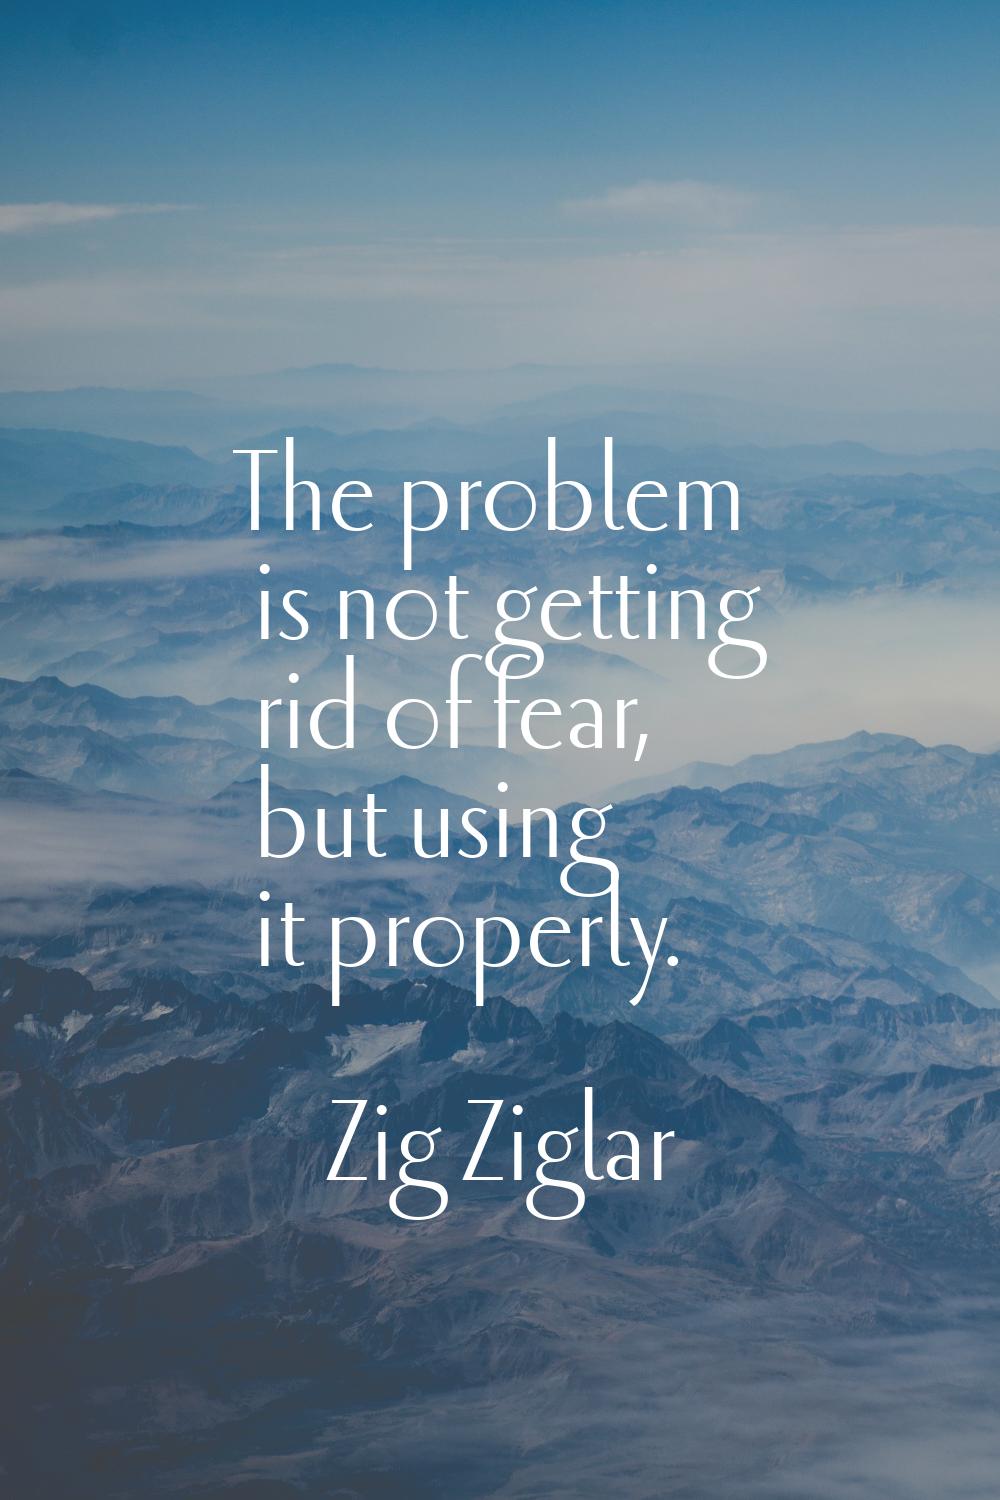 The problem is not getting rid of fear, but using it properly.